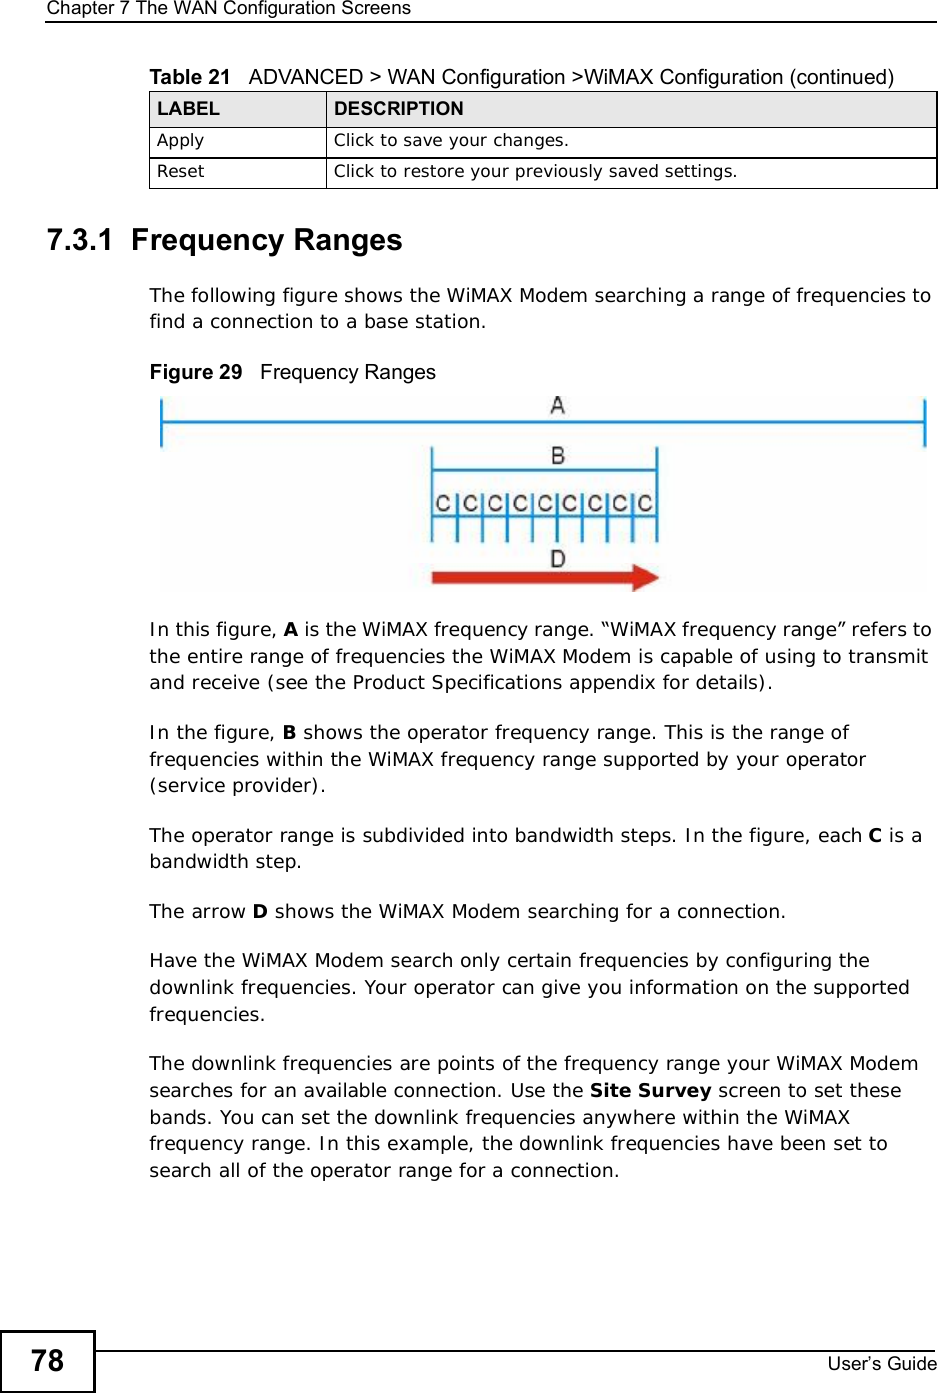 Chapter 7The WAN Configuration ScreensUser s Guide787.3.1  Frequency RangesThe following figure shows the WiMAX Modem searching a range of frequencies to find a connection to a base station. Figure 29   Frequency RangesIn this figure, A is the WiMAX frequency range. “WiMAX frequency range” refers to the entire range of frequencies the WiMAX Modem is capable of using to transmit and receive (see the Product Specifications appendix for details). In the figure, B shows the operator frequency range. This is the range of frequencies within the WiMAX frequency range supported by your operator (service provider).The operator range is subdivided into bandwidth steps. In the figure, each C is a bandwidth step.The arrow D shows the WiMAX Modem searching for a connection.Have the WiMAX Modem search only certain frequencies by configuring the downlink frequencies. Your operator can give you information on the supported frequencies. The downlink frequencies are points of the frequency range your WiMAX Modem searches for an available connection. Use the Site Survey screen to set these bands. You can set the downlink frequencies anywhere within the WiMAX frequency range. In this example, the downlink frequencies have been set to search all of the operator range for a connection.ApplyClick to save your changes.ResetClick to restore your previously saved settings.Table 21   ADVANCED &gt; WAN Configuration &gt;WiMAX Configuration (continued)LABEL DESCRIPTION